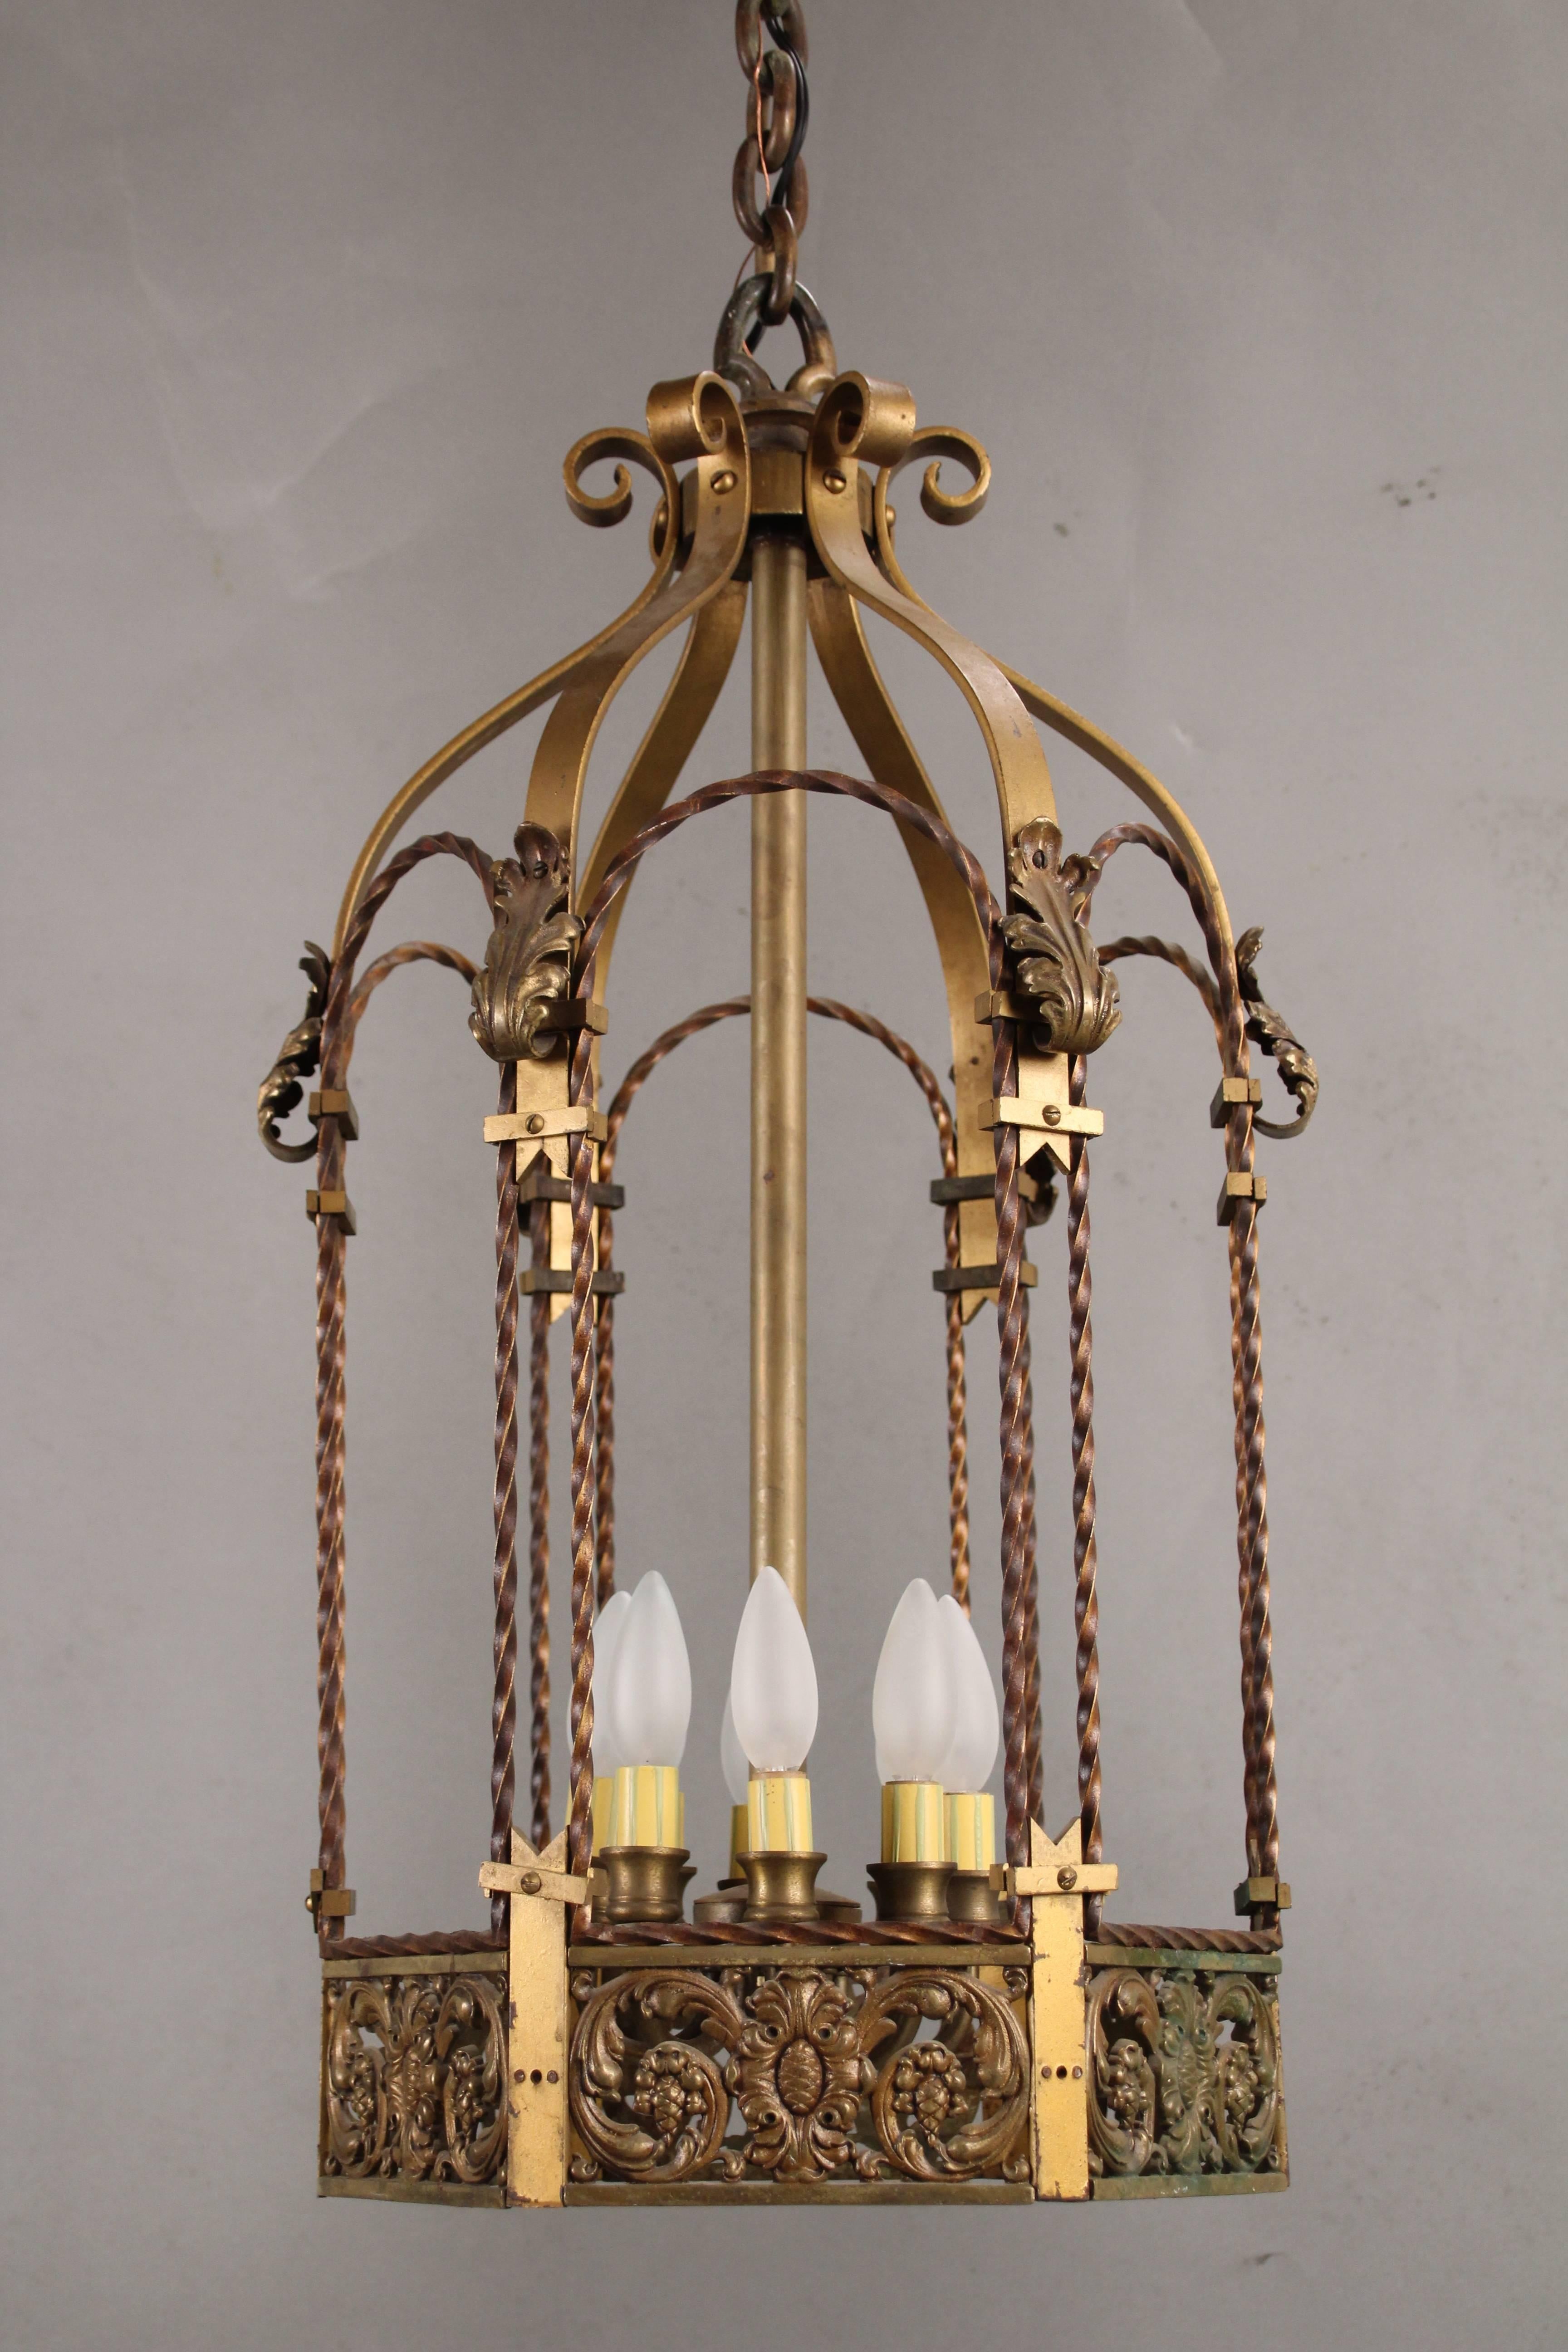 Wonderful 1920s pendant light with fine casting and original polychrome finish. Measures: 30